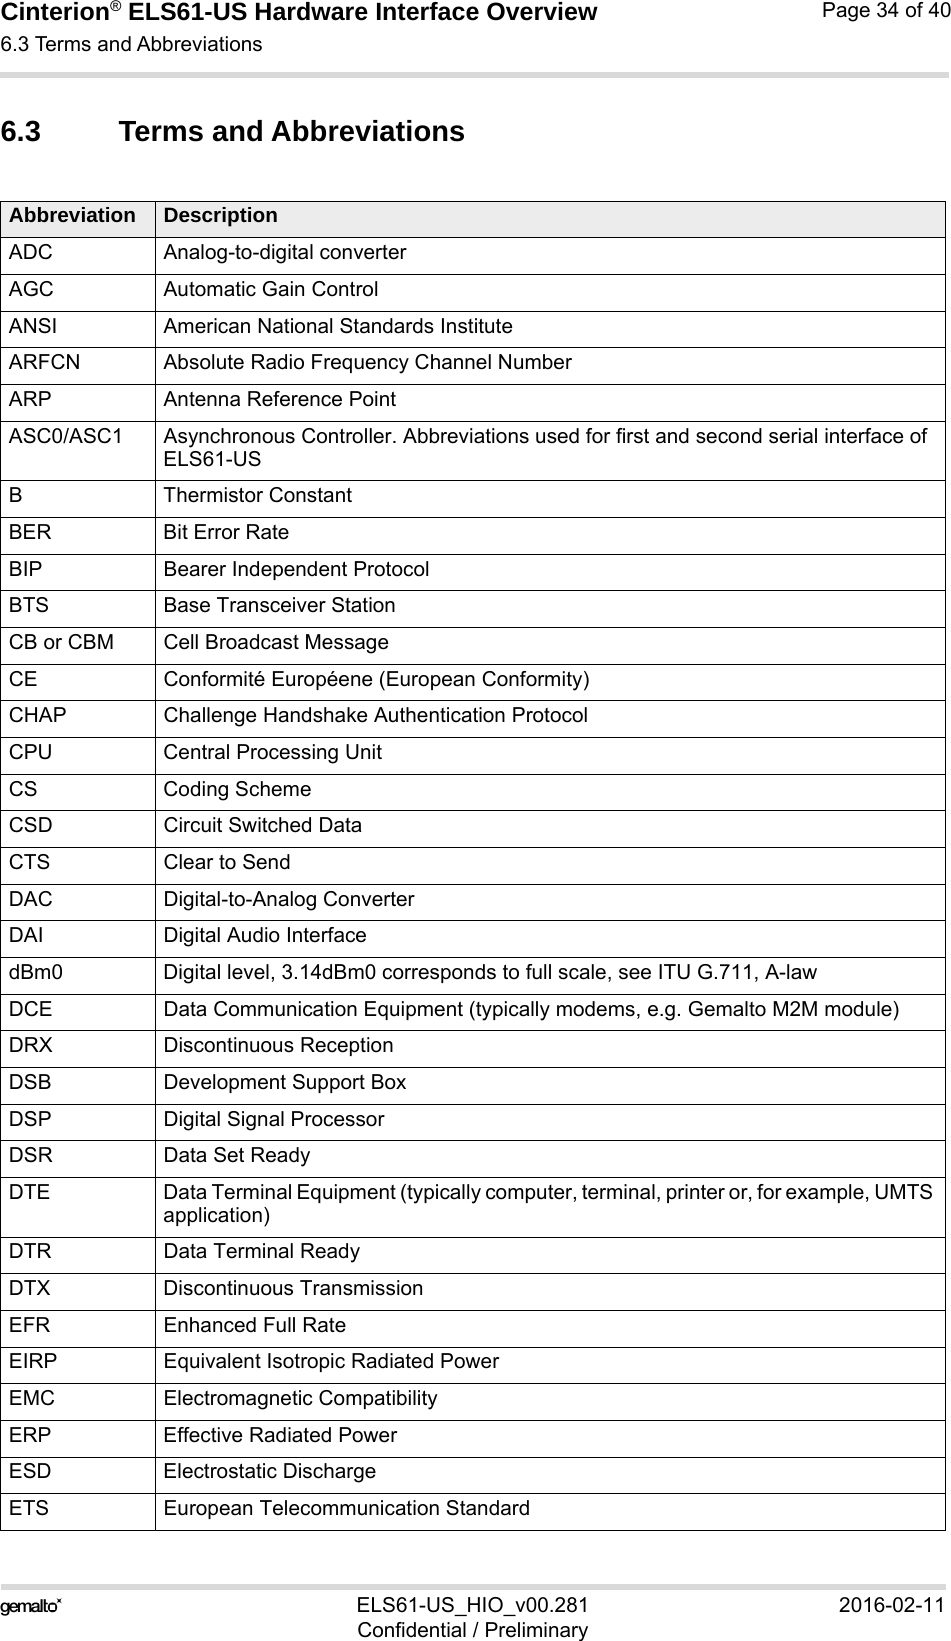 Cinterion® ELS61-US Hardware Interface Overview6.3 Terms and Abbreviations37ELS61-US_HIO_v00.281 2016-02-11Confidential / PreliminaryPage 34 of 406.3 Terms and AbbreviationsAbbreviation DescriptionADC Analog-to-digital converterAGC Automatic Gain ControlANSI American National Standards InstituteARFCN Absolute Radio Frequency Channel NumberARP Antenna Reference PointASC0/ASC1 Asynchronous Controller. Abbreviations used for first and second serial interface of ELS61-USB Thermistor ConstantBER Bit Error RateBIP Bearer Independent ProtocolBTS Base Transceiver StationCB or CBM Cell Broadcast MessageCE Conformité Européene (European Conformity)CHAP Challenge Handshake Authentication ProtocolCPU Central Processing UnitCS Coding SchemeCSD Circuit Switched DataCTS Clear to SendDAC Digital-to-Analog ConverterDAI Digital Audio InterfacedBm0 Digital level, 3.14dBm0 corresponds to full scale, see ITU G.711, A-lawDCE Data Communication Equipment (typically modems, e.g. Gemalto M2M module)DRX Discontinuous ReceptionDSB Development Support BoxDSP Digital Signal ProcessorDSR Data Set ReadyDTE Data Terminal Equipment (typically computer, terminal, printer or, for example, UMTS application)DTR Data Terminal ReadyDTX Discontinuous TransmissionEFR Enhanced Full RateEIRP Equivalent Isotropic Radiated PowerEMC Electromagnetic CompatibilityERP Effective Radiated PowerESD Electrostatic DischargeETS European Telecommunication Standard